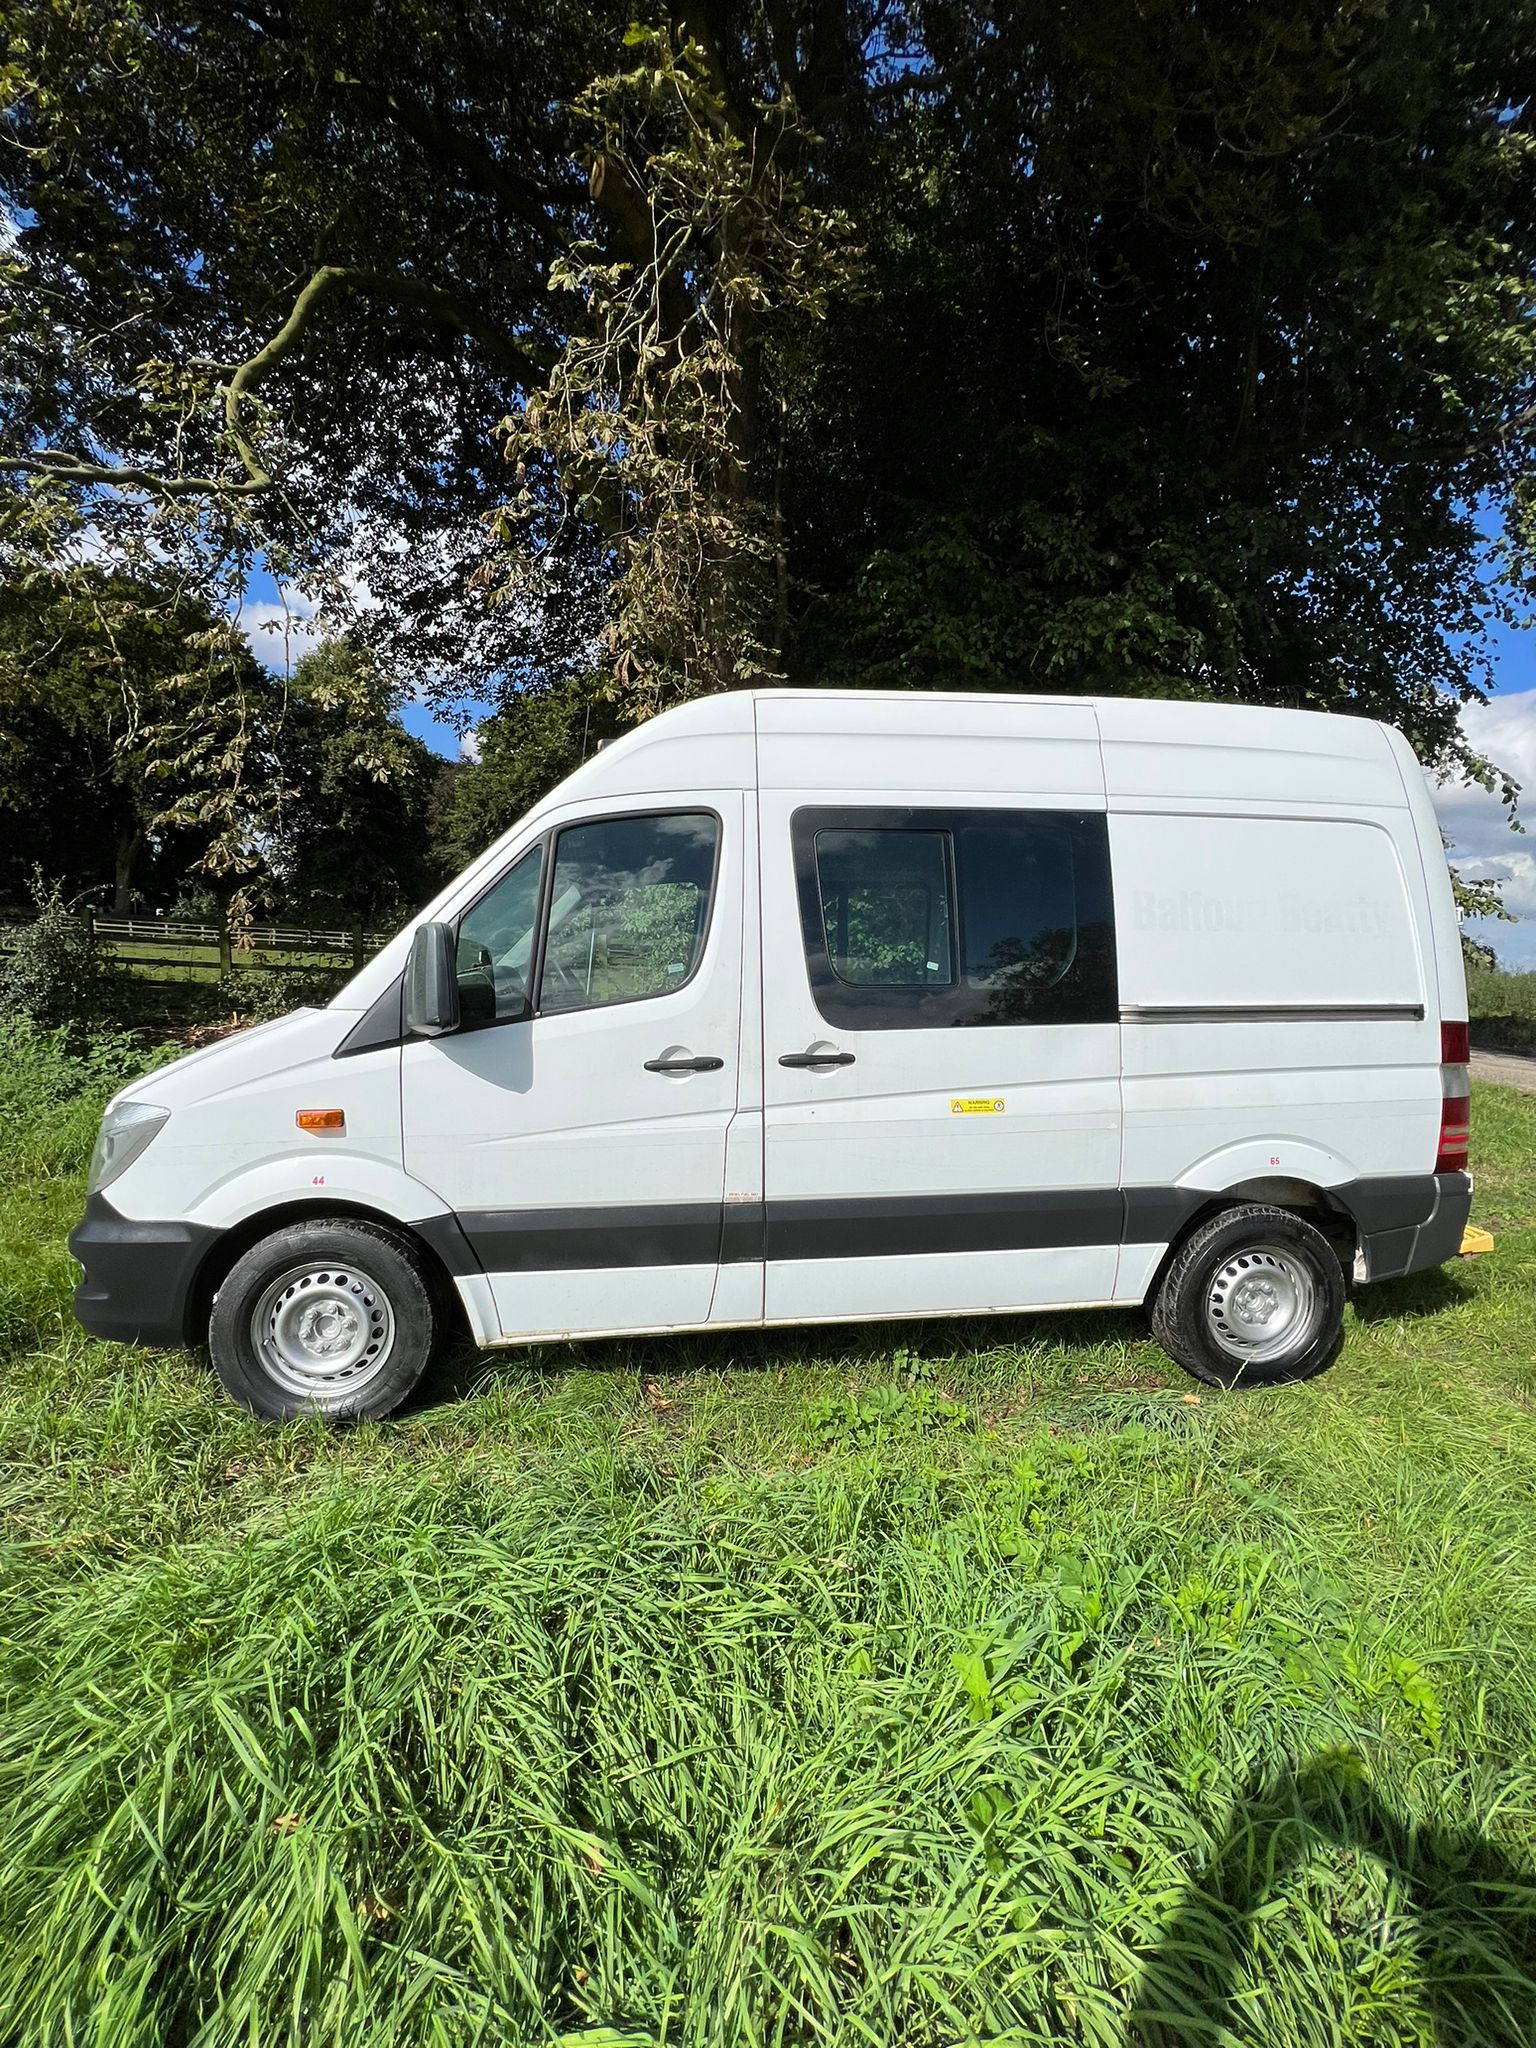 Bid on 2018 MERCEDES SPRINTER WELFARE UNIT EURO6- Buy &amp; Sell on Auction with EAMA Group